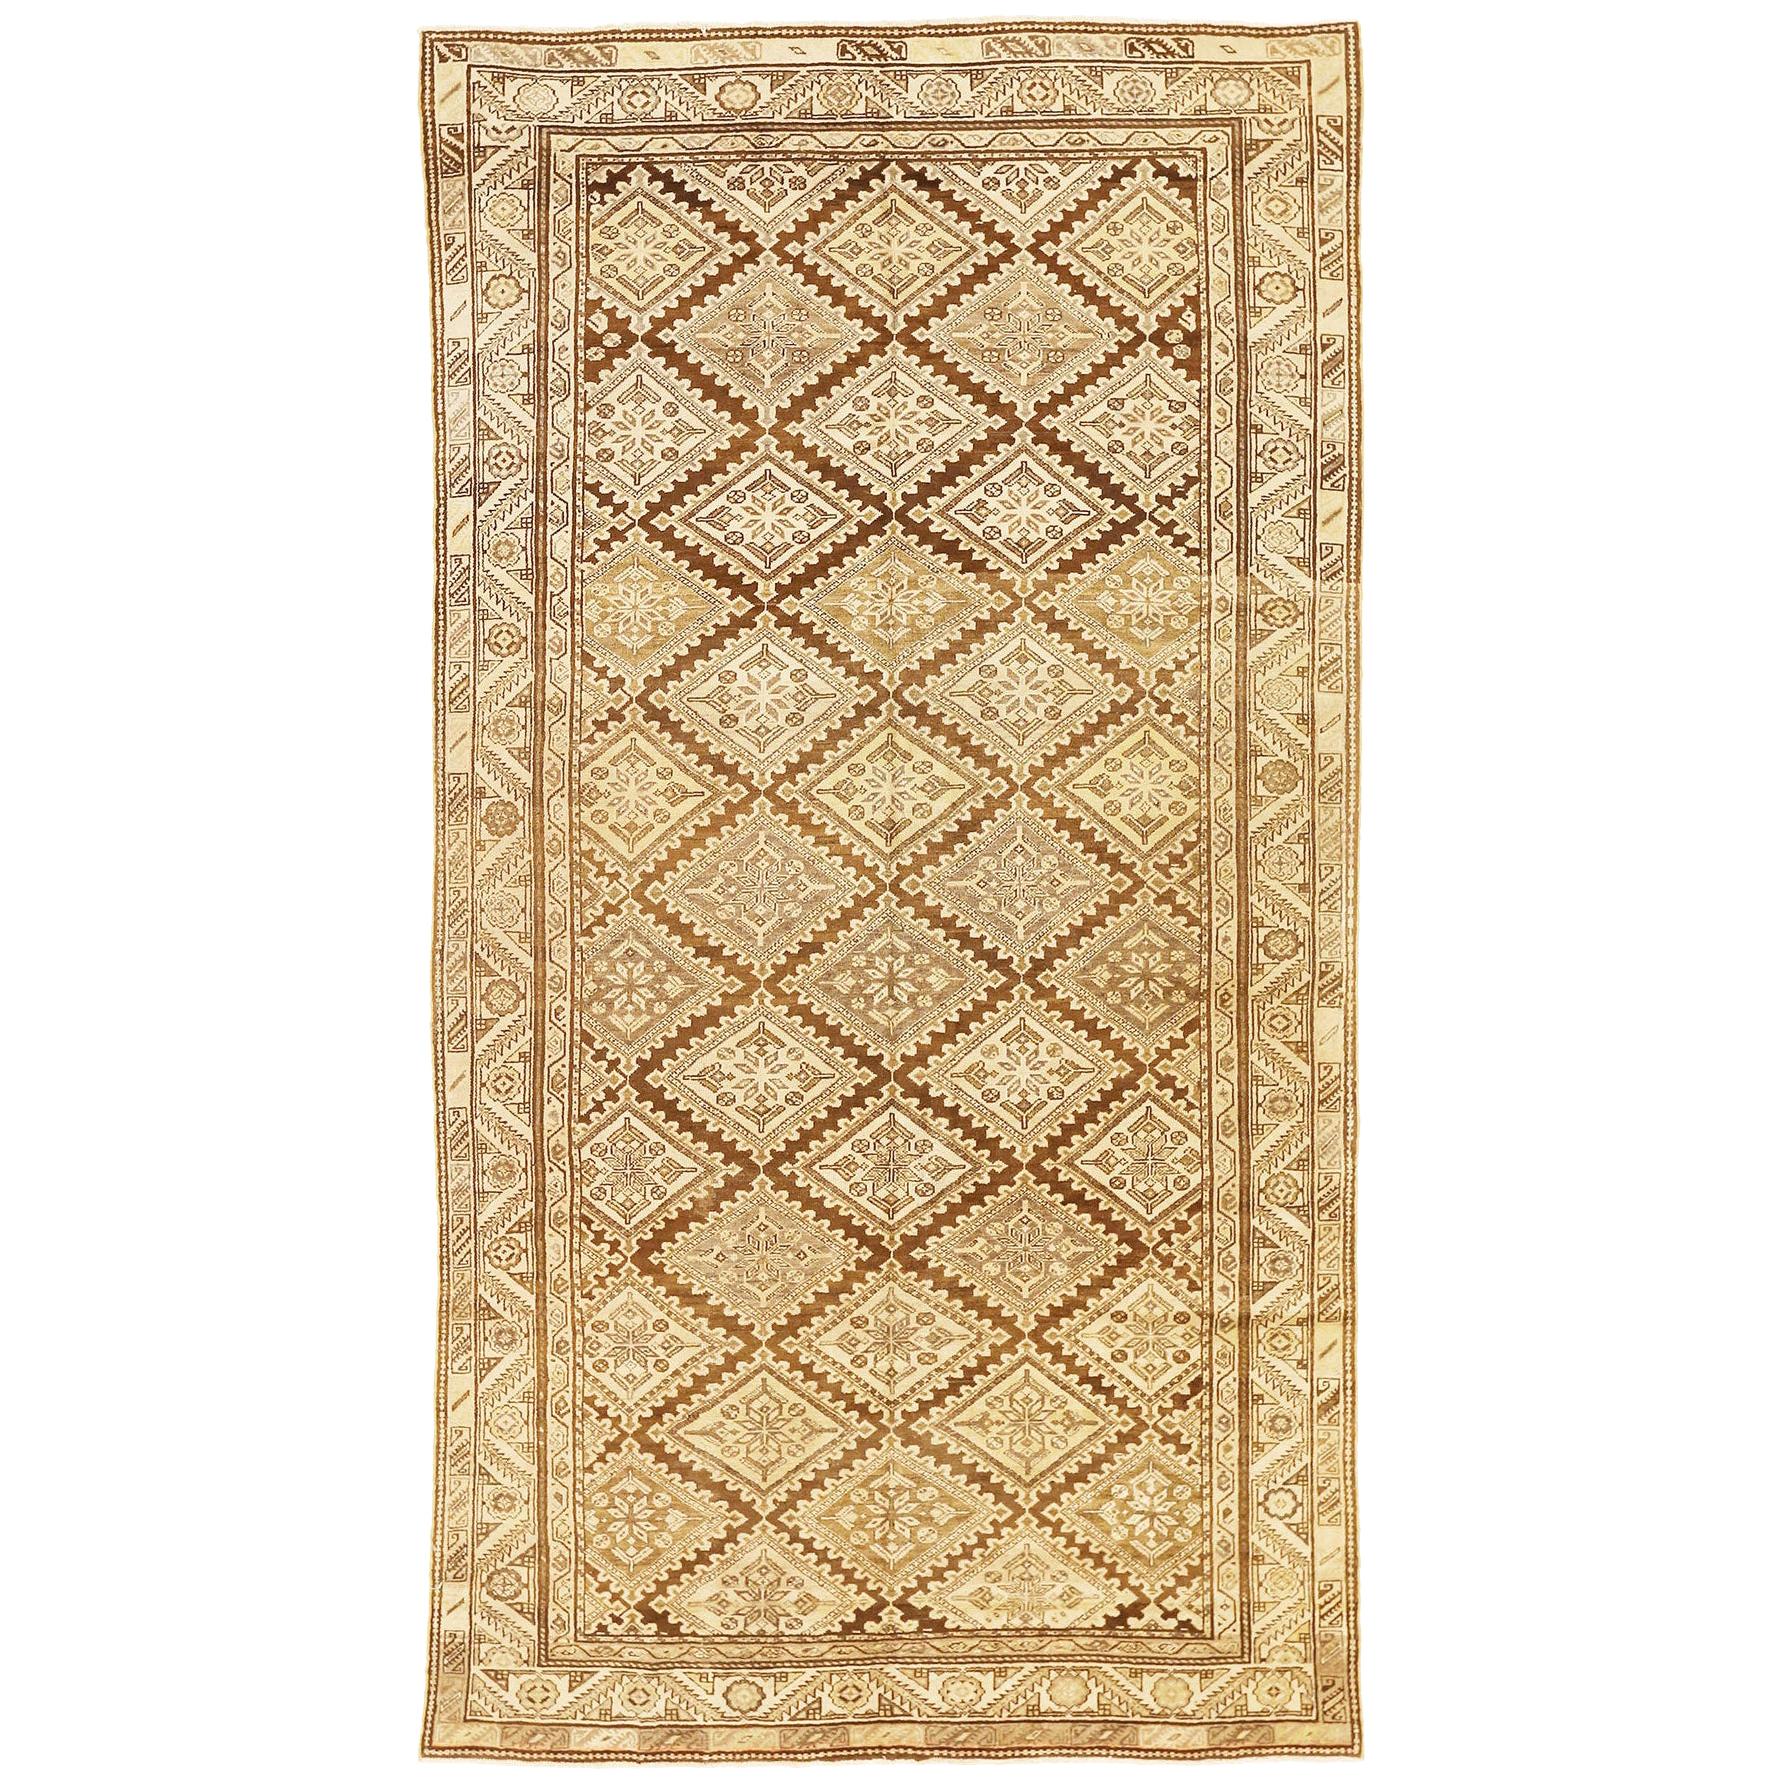 Antique Persian Farahan Rug with Ivory Tribal Medallions over a Brown Field